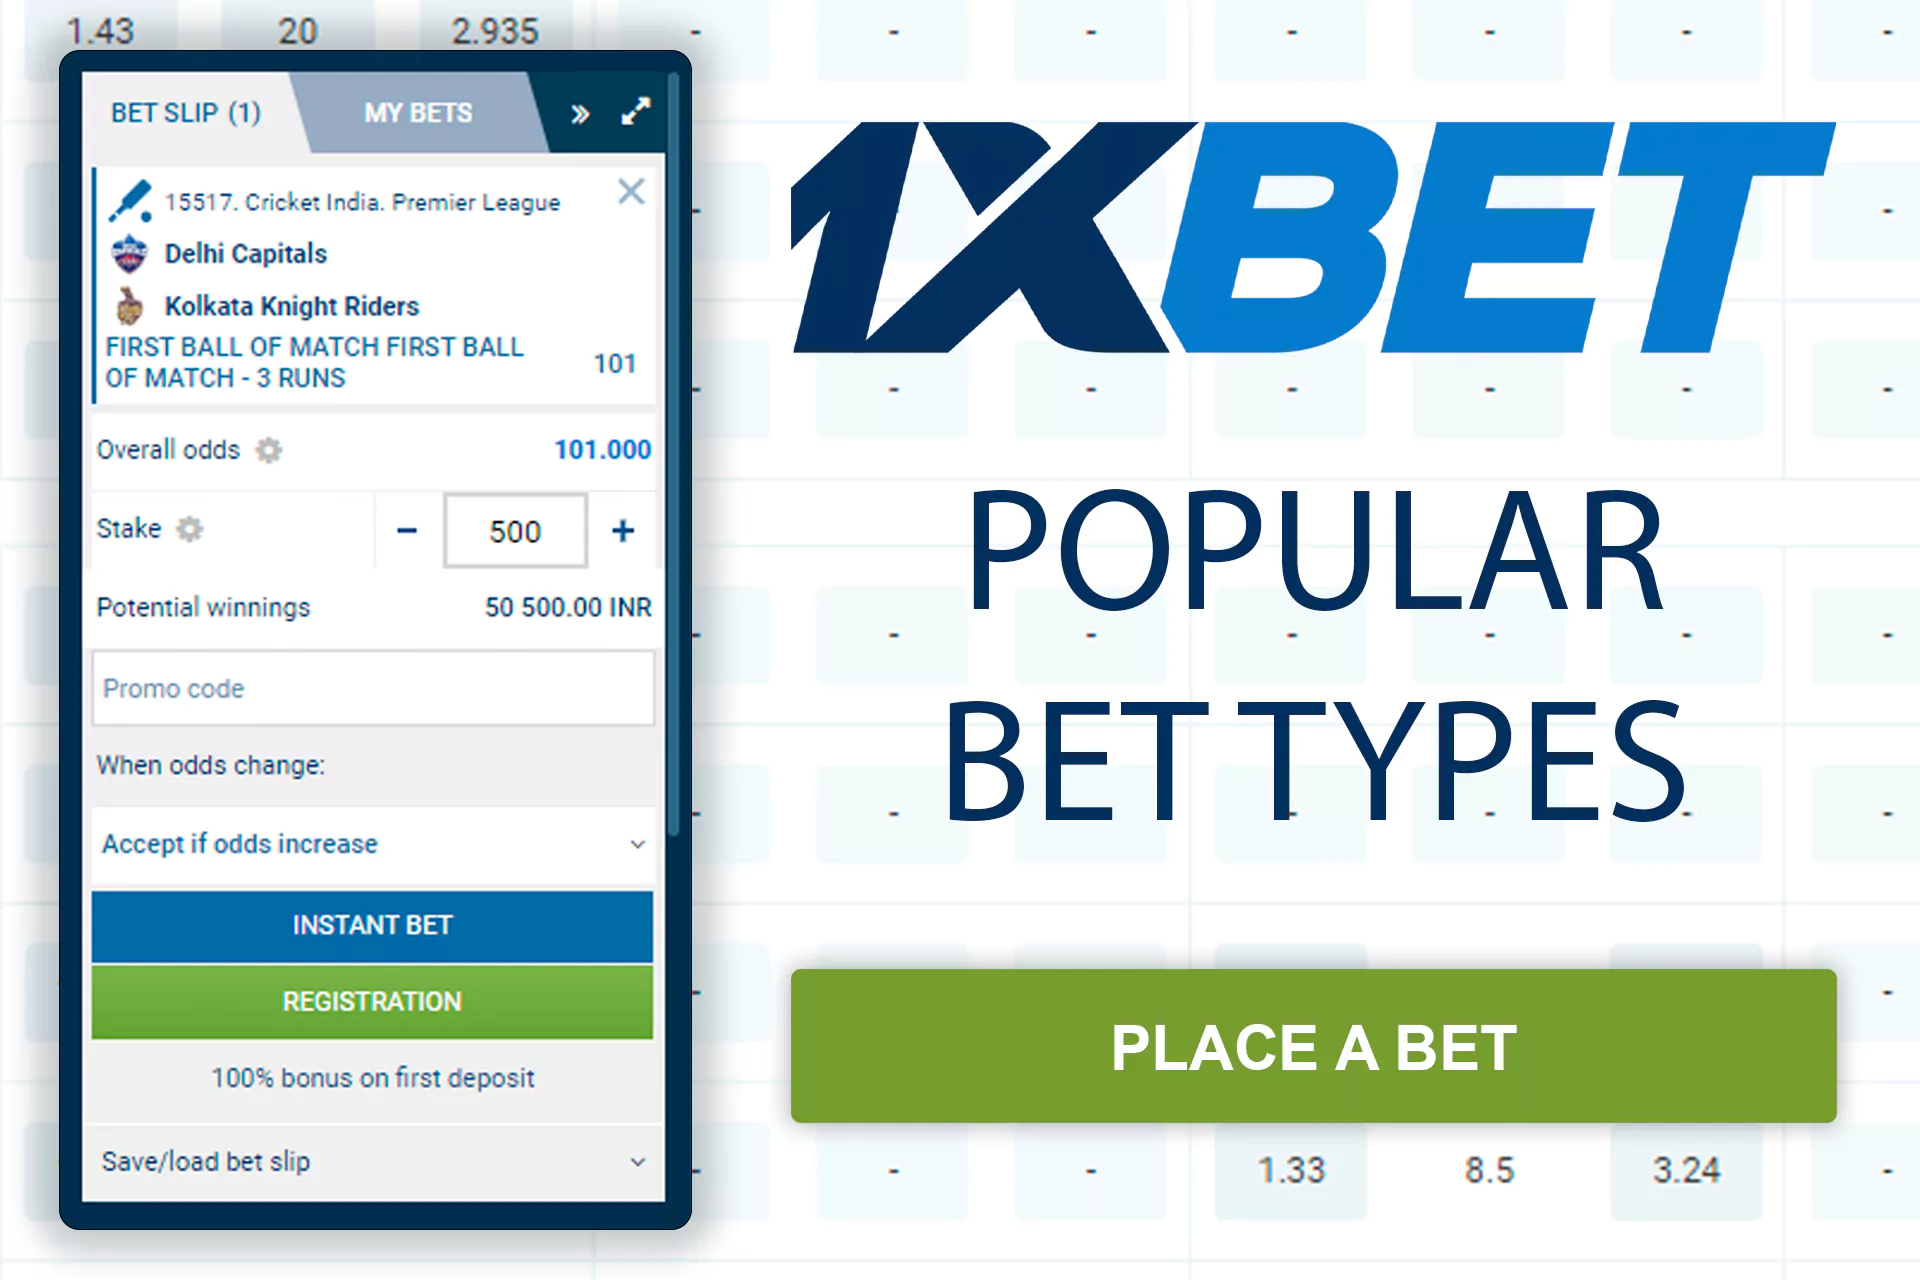 1xBet offers different types of bets on sporting events.